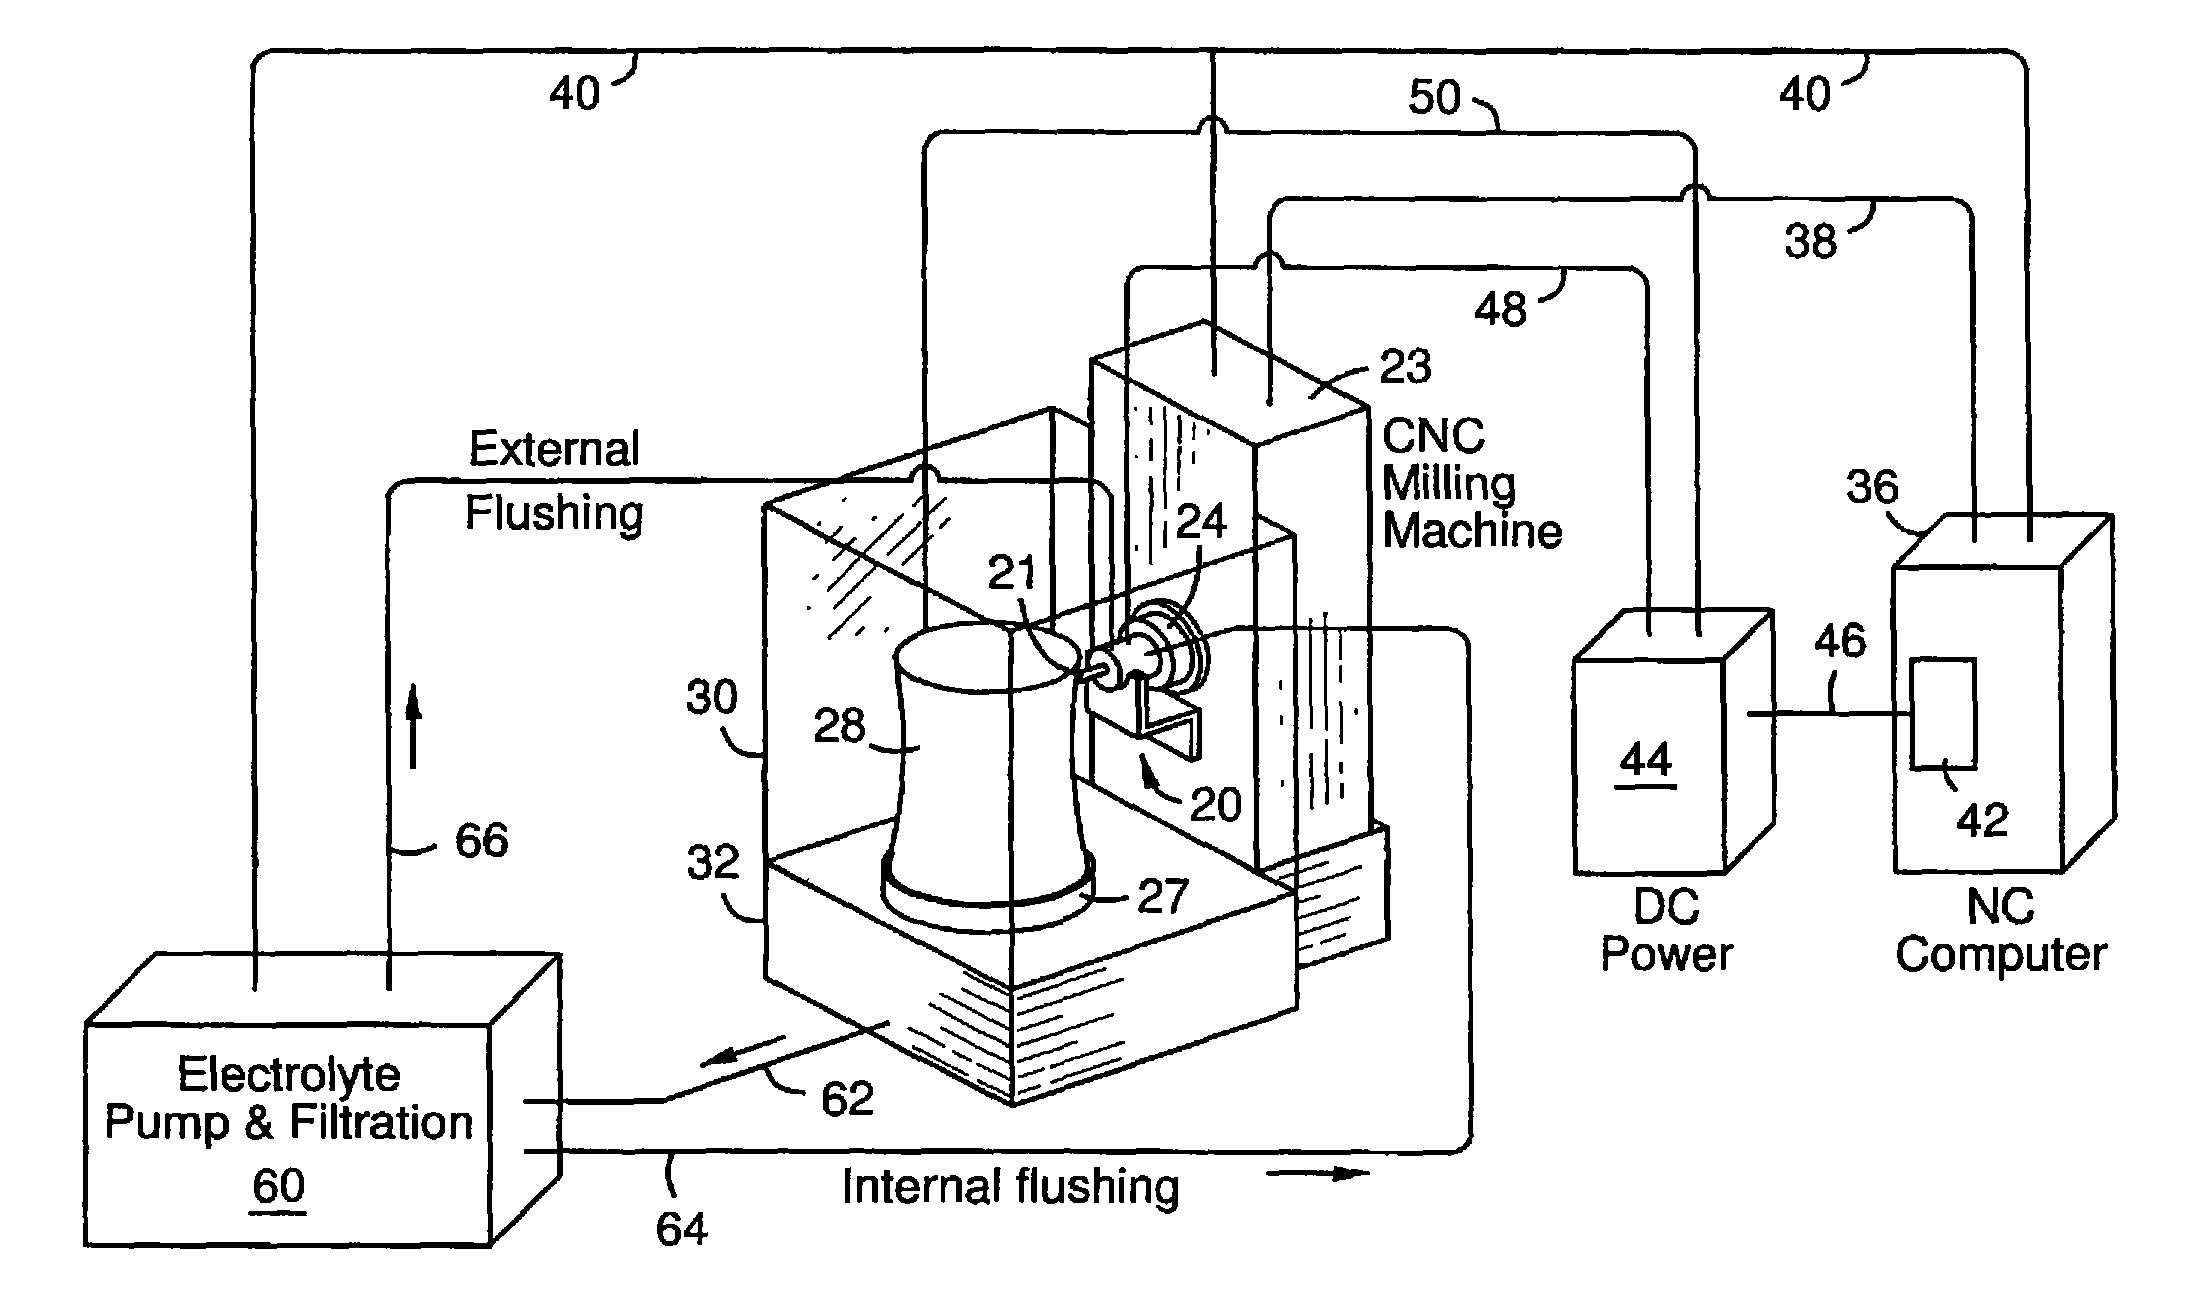 Adaptive spindle assembly for electroerosion machining on a CNC machine tool